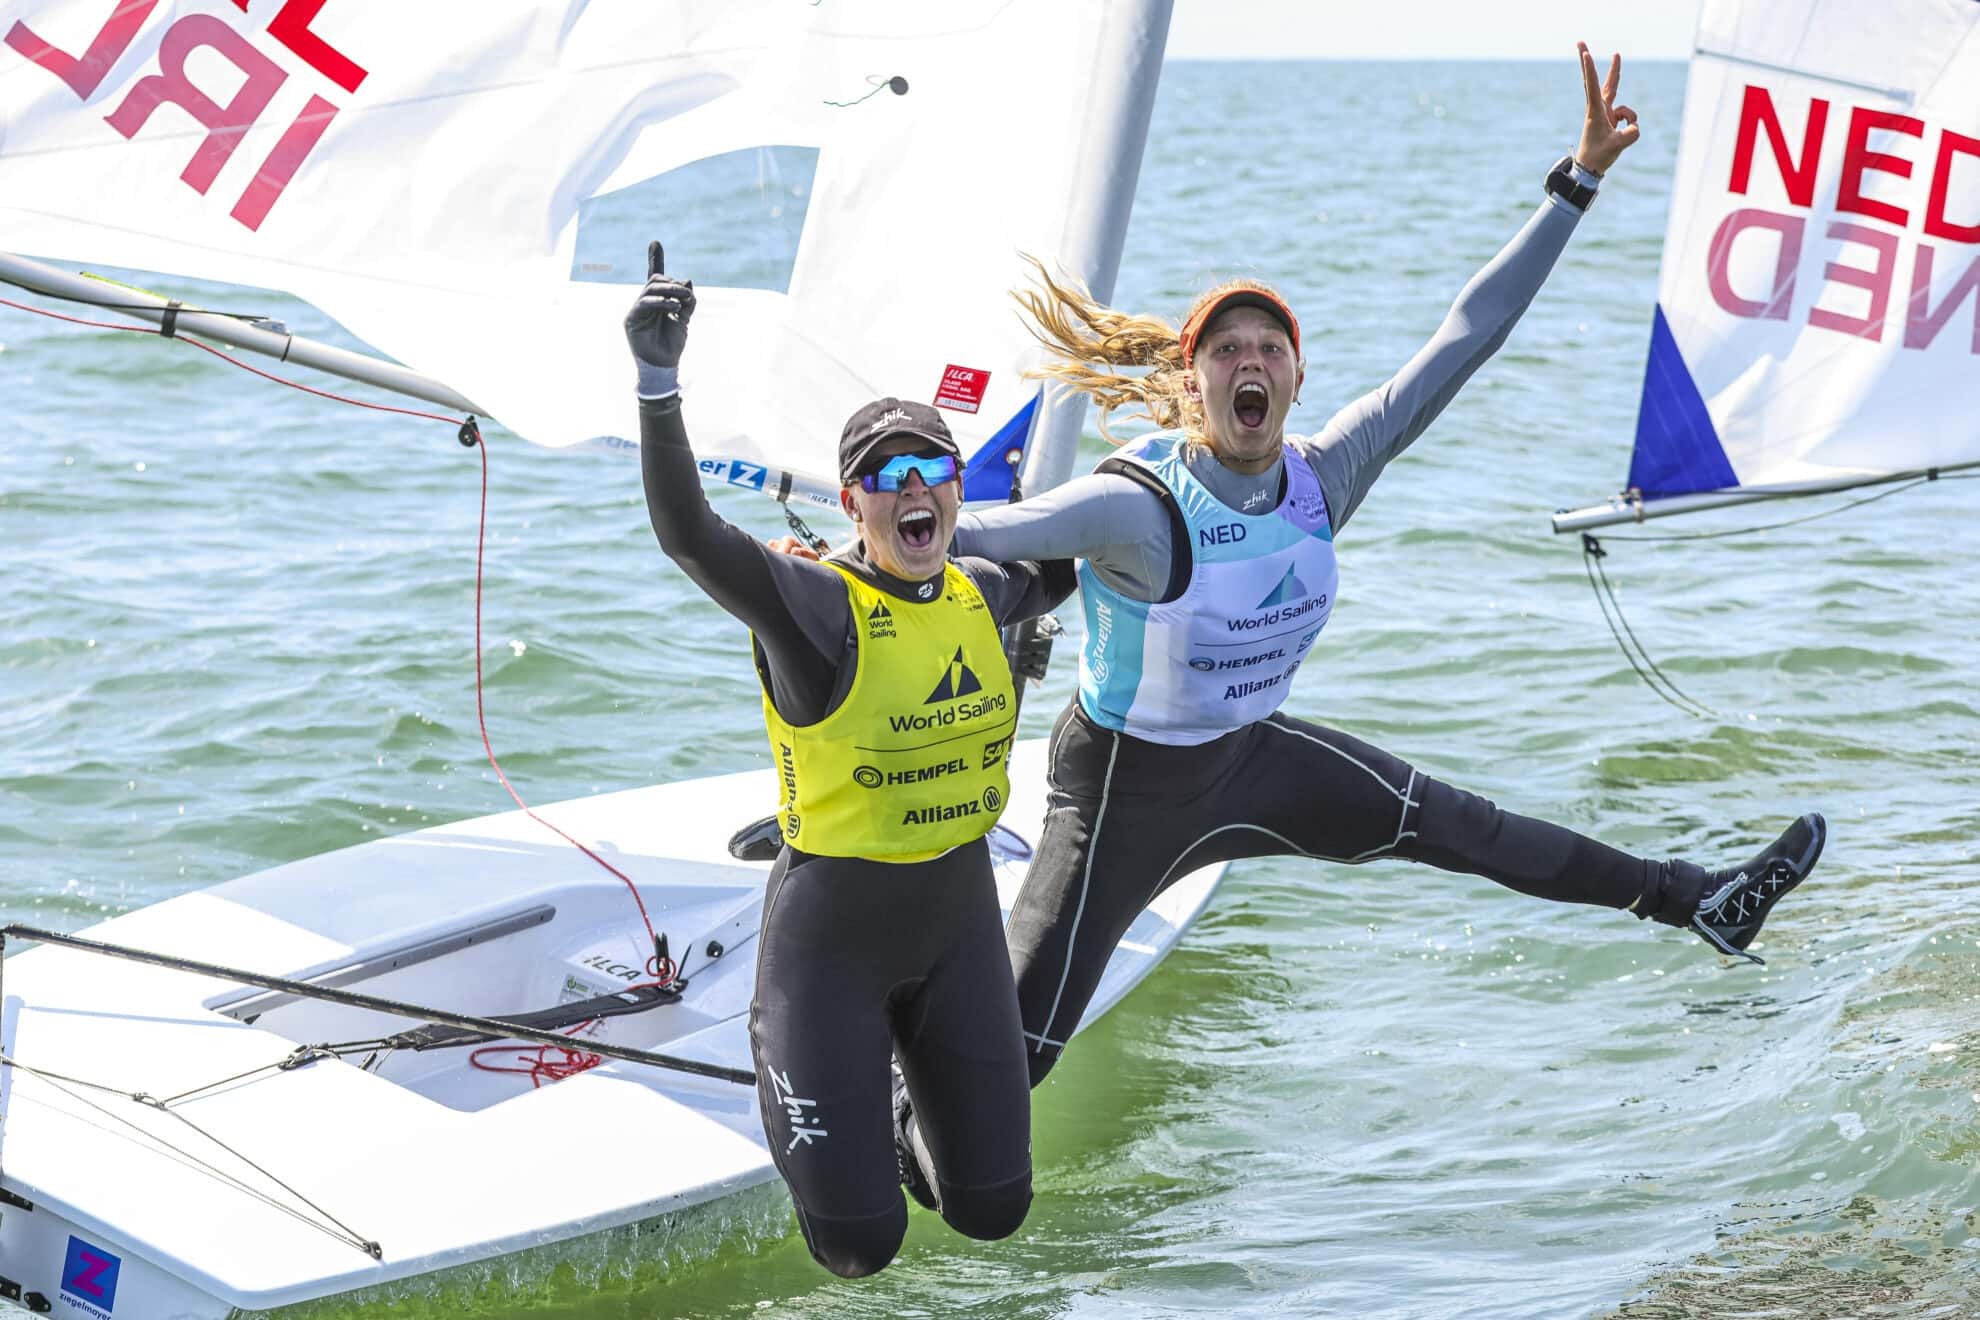 Eve McMahon (left) celebrates her World Sailing Youth Gold in The Hague with rival Roos Wind of the Netherlands Credit: Sailing Energy